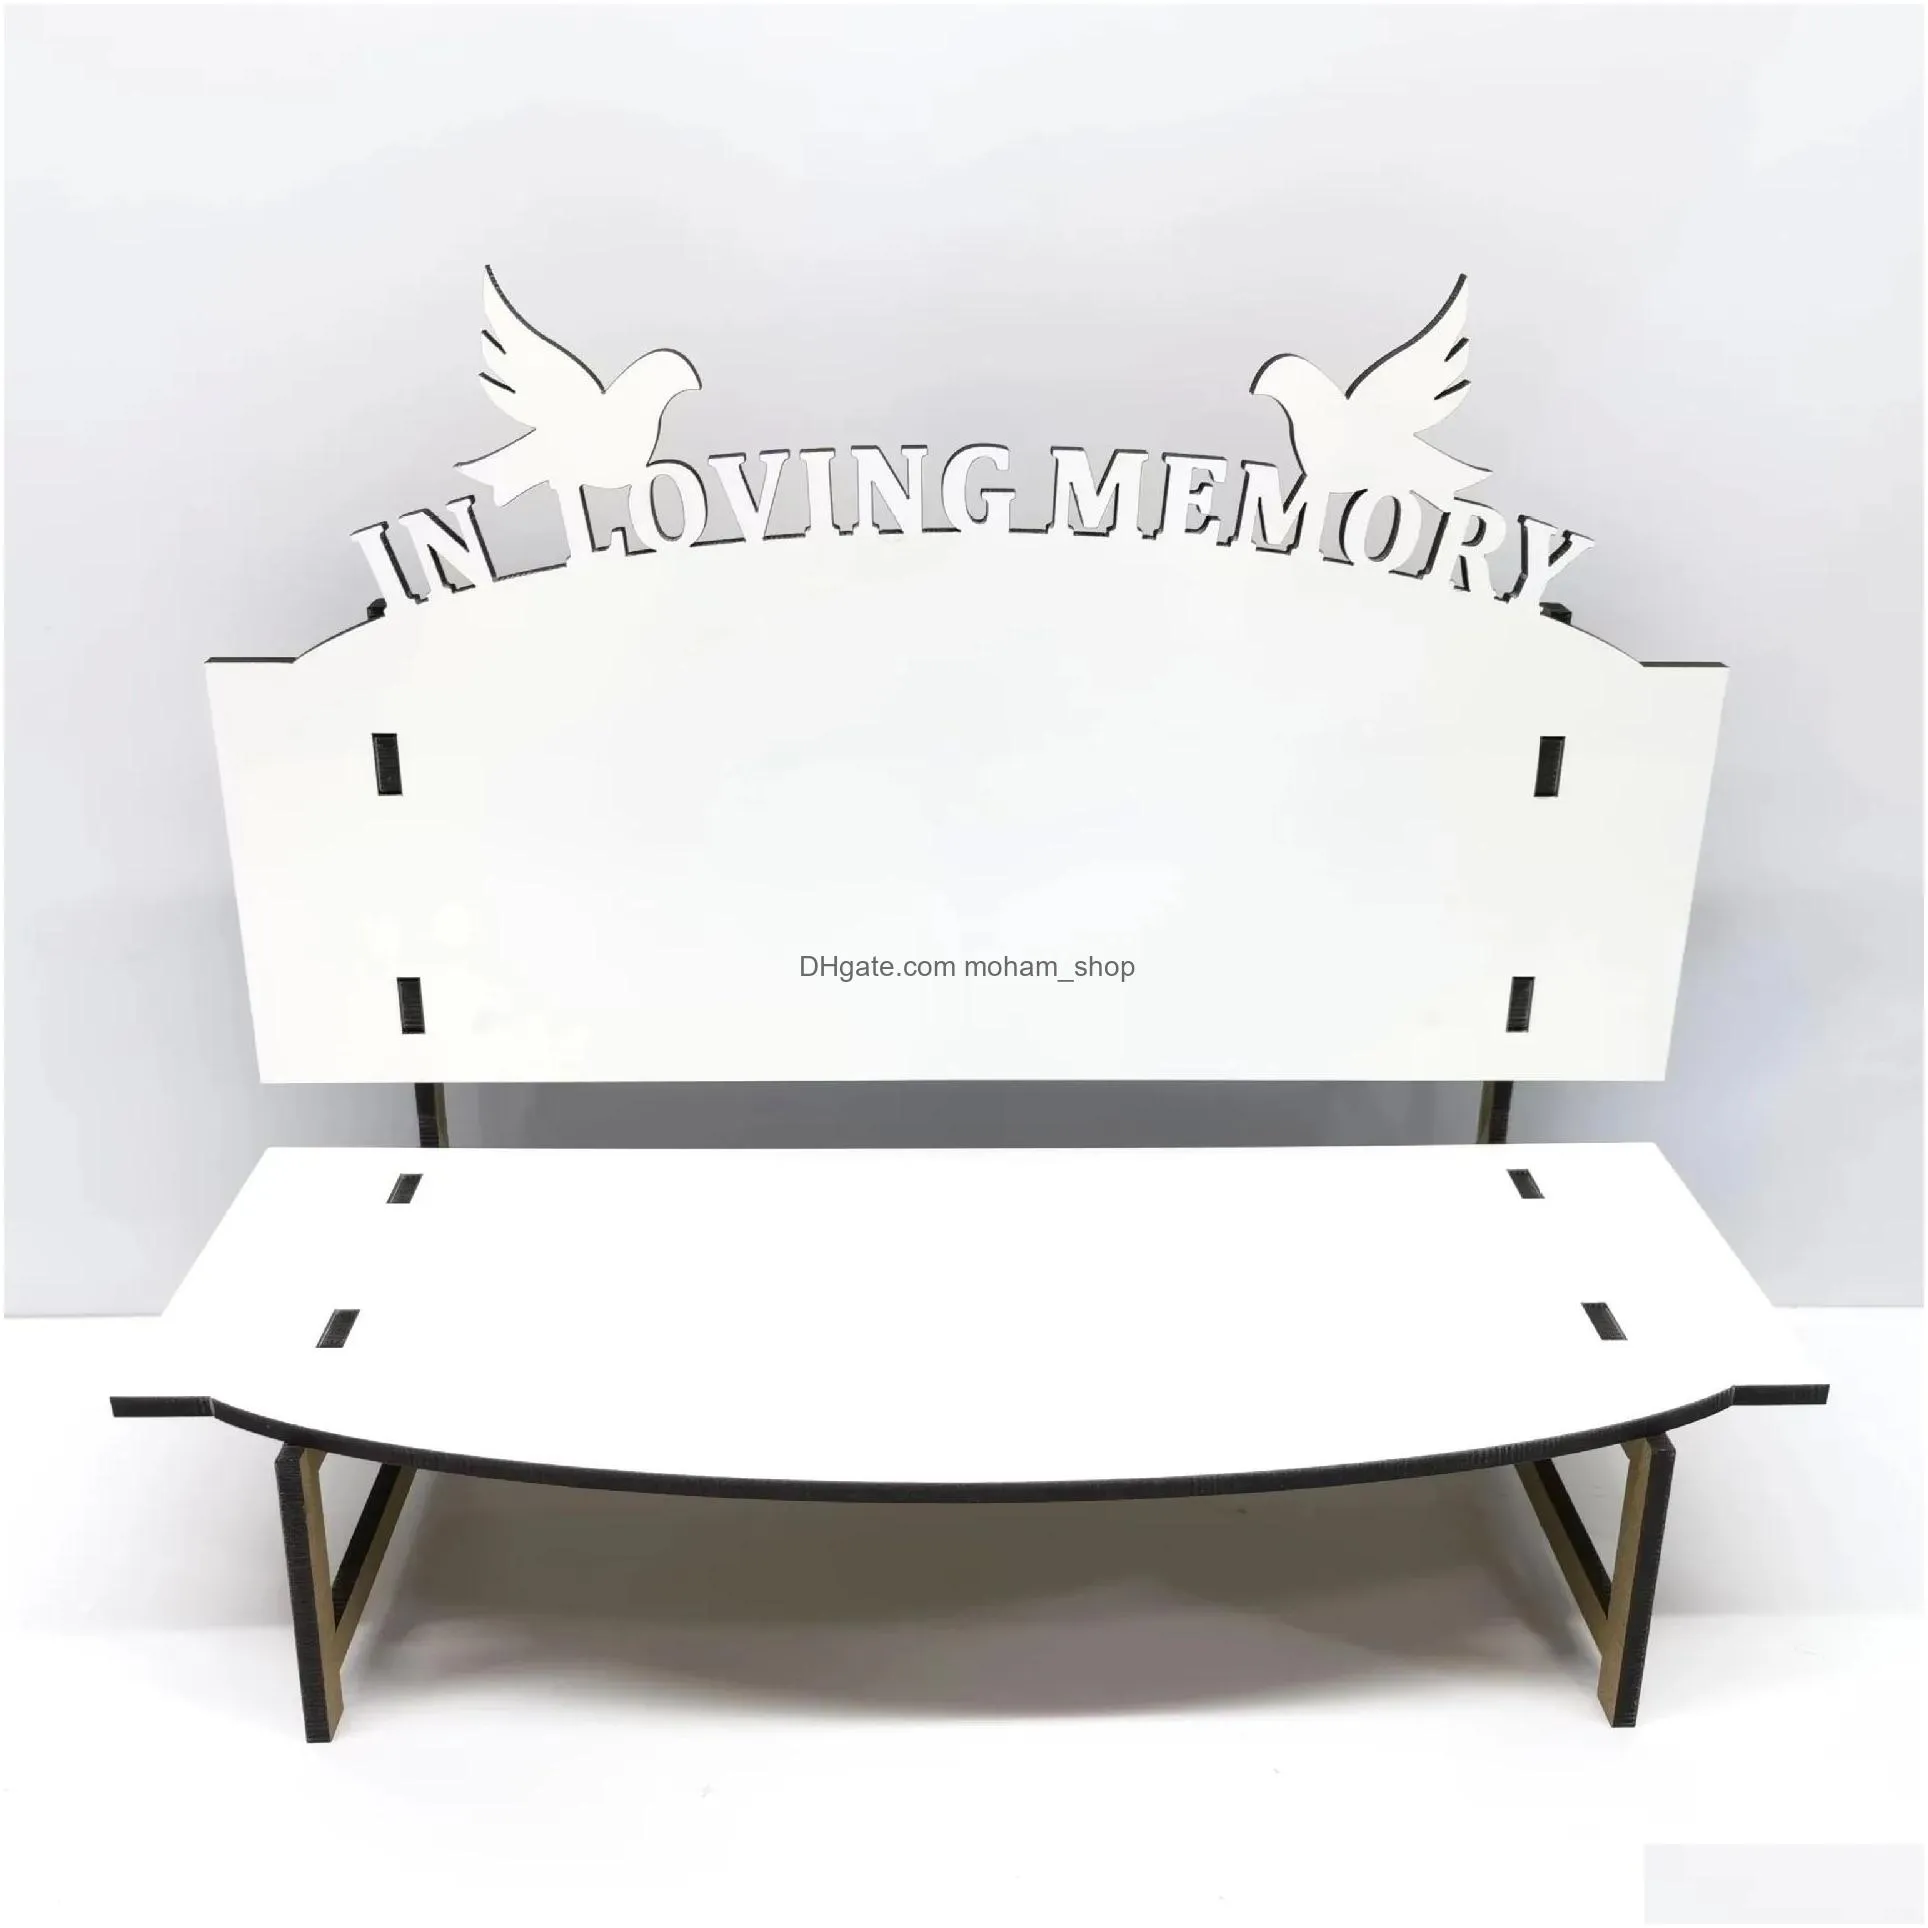 sublimation mdf memorial benches party supplies blank wooden christmas ornament room decor accessories 920